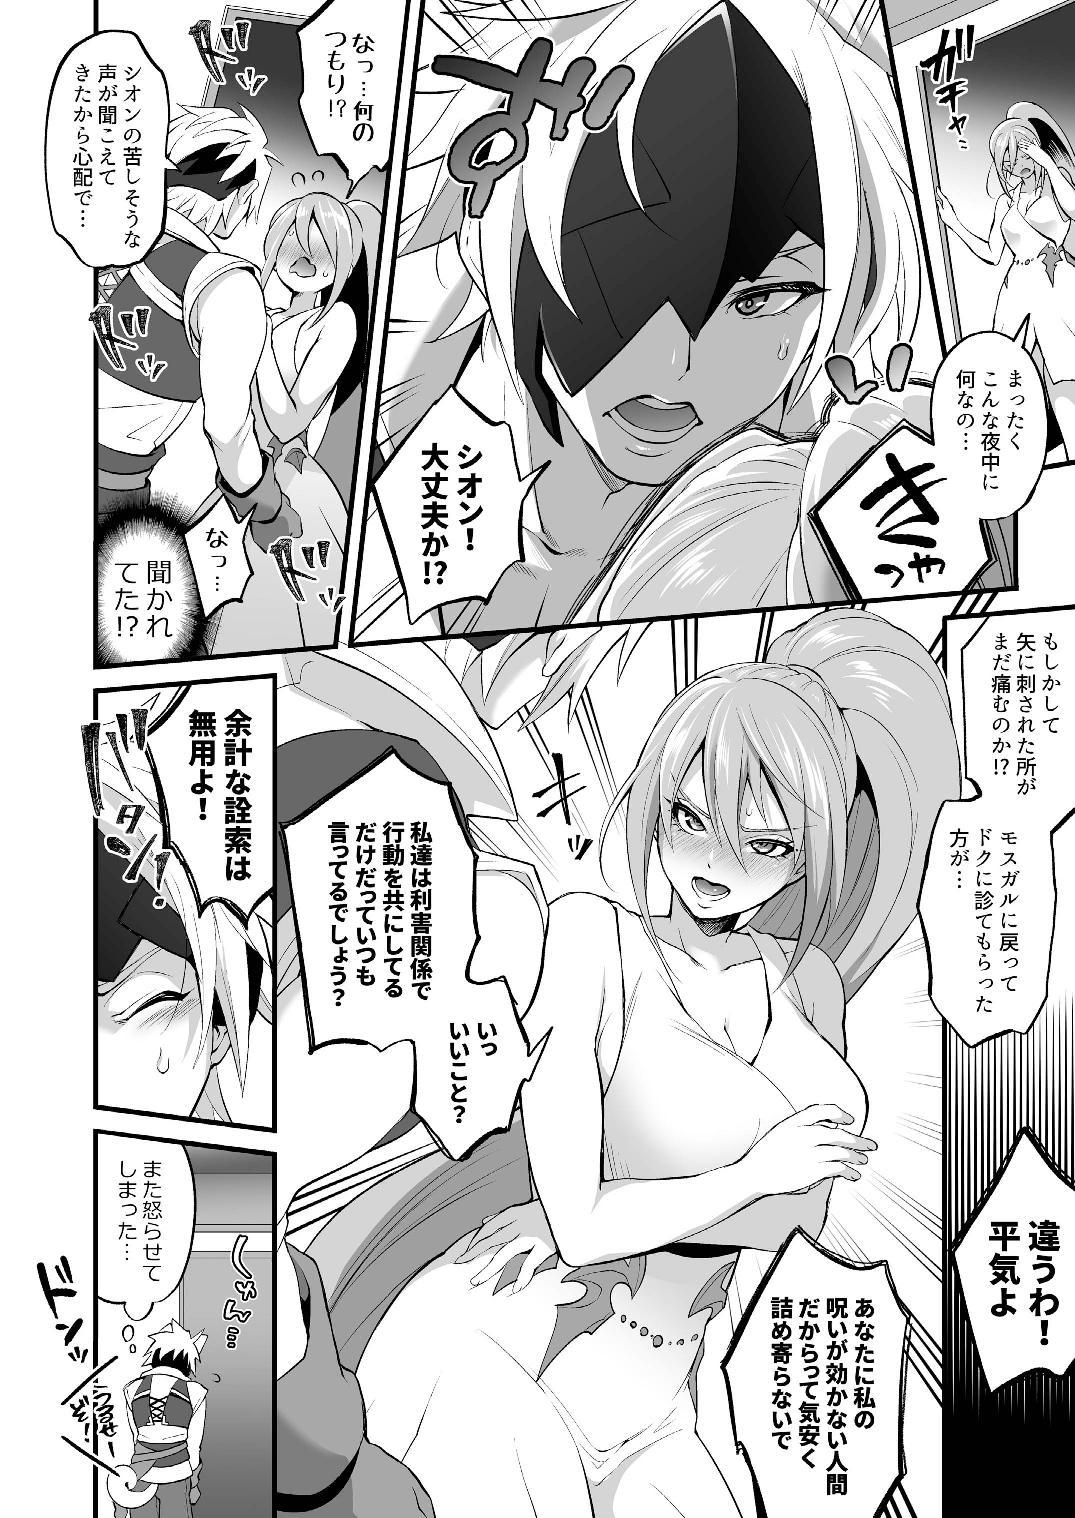 Asiansex 私に詰め寄ると〇〇〇がイくわよ…! - Tales of arise Playing - Page 8